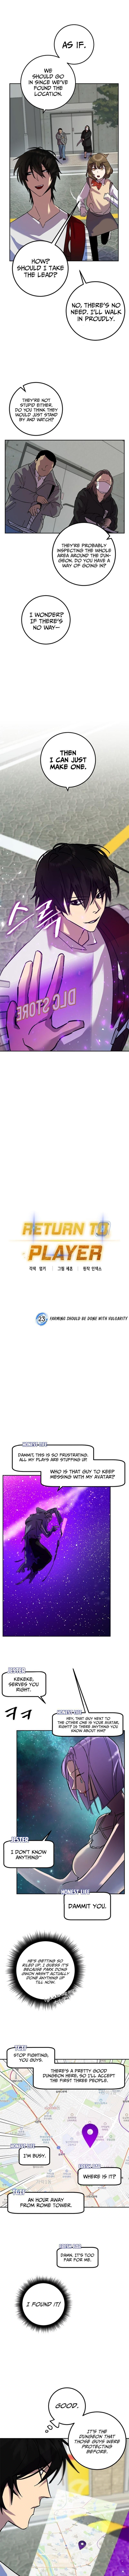 return-to-player-chap-23-3